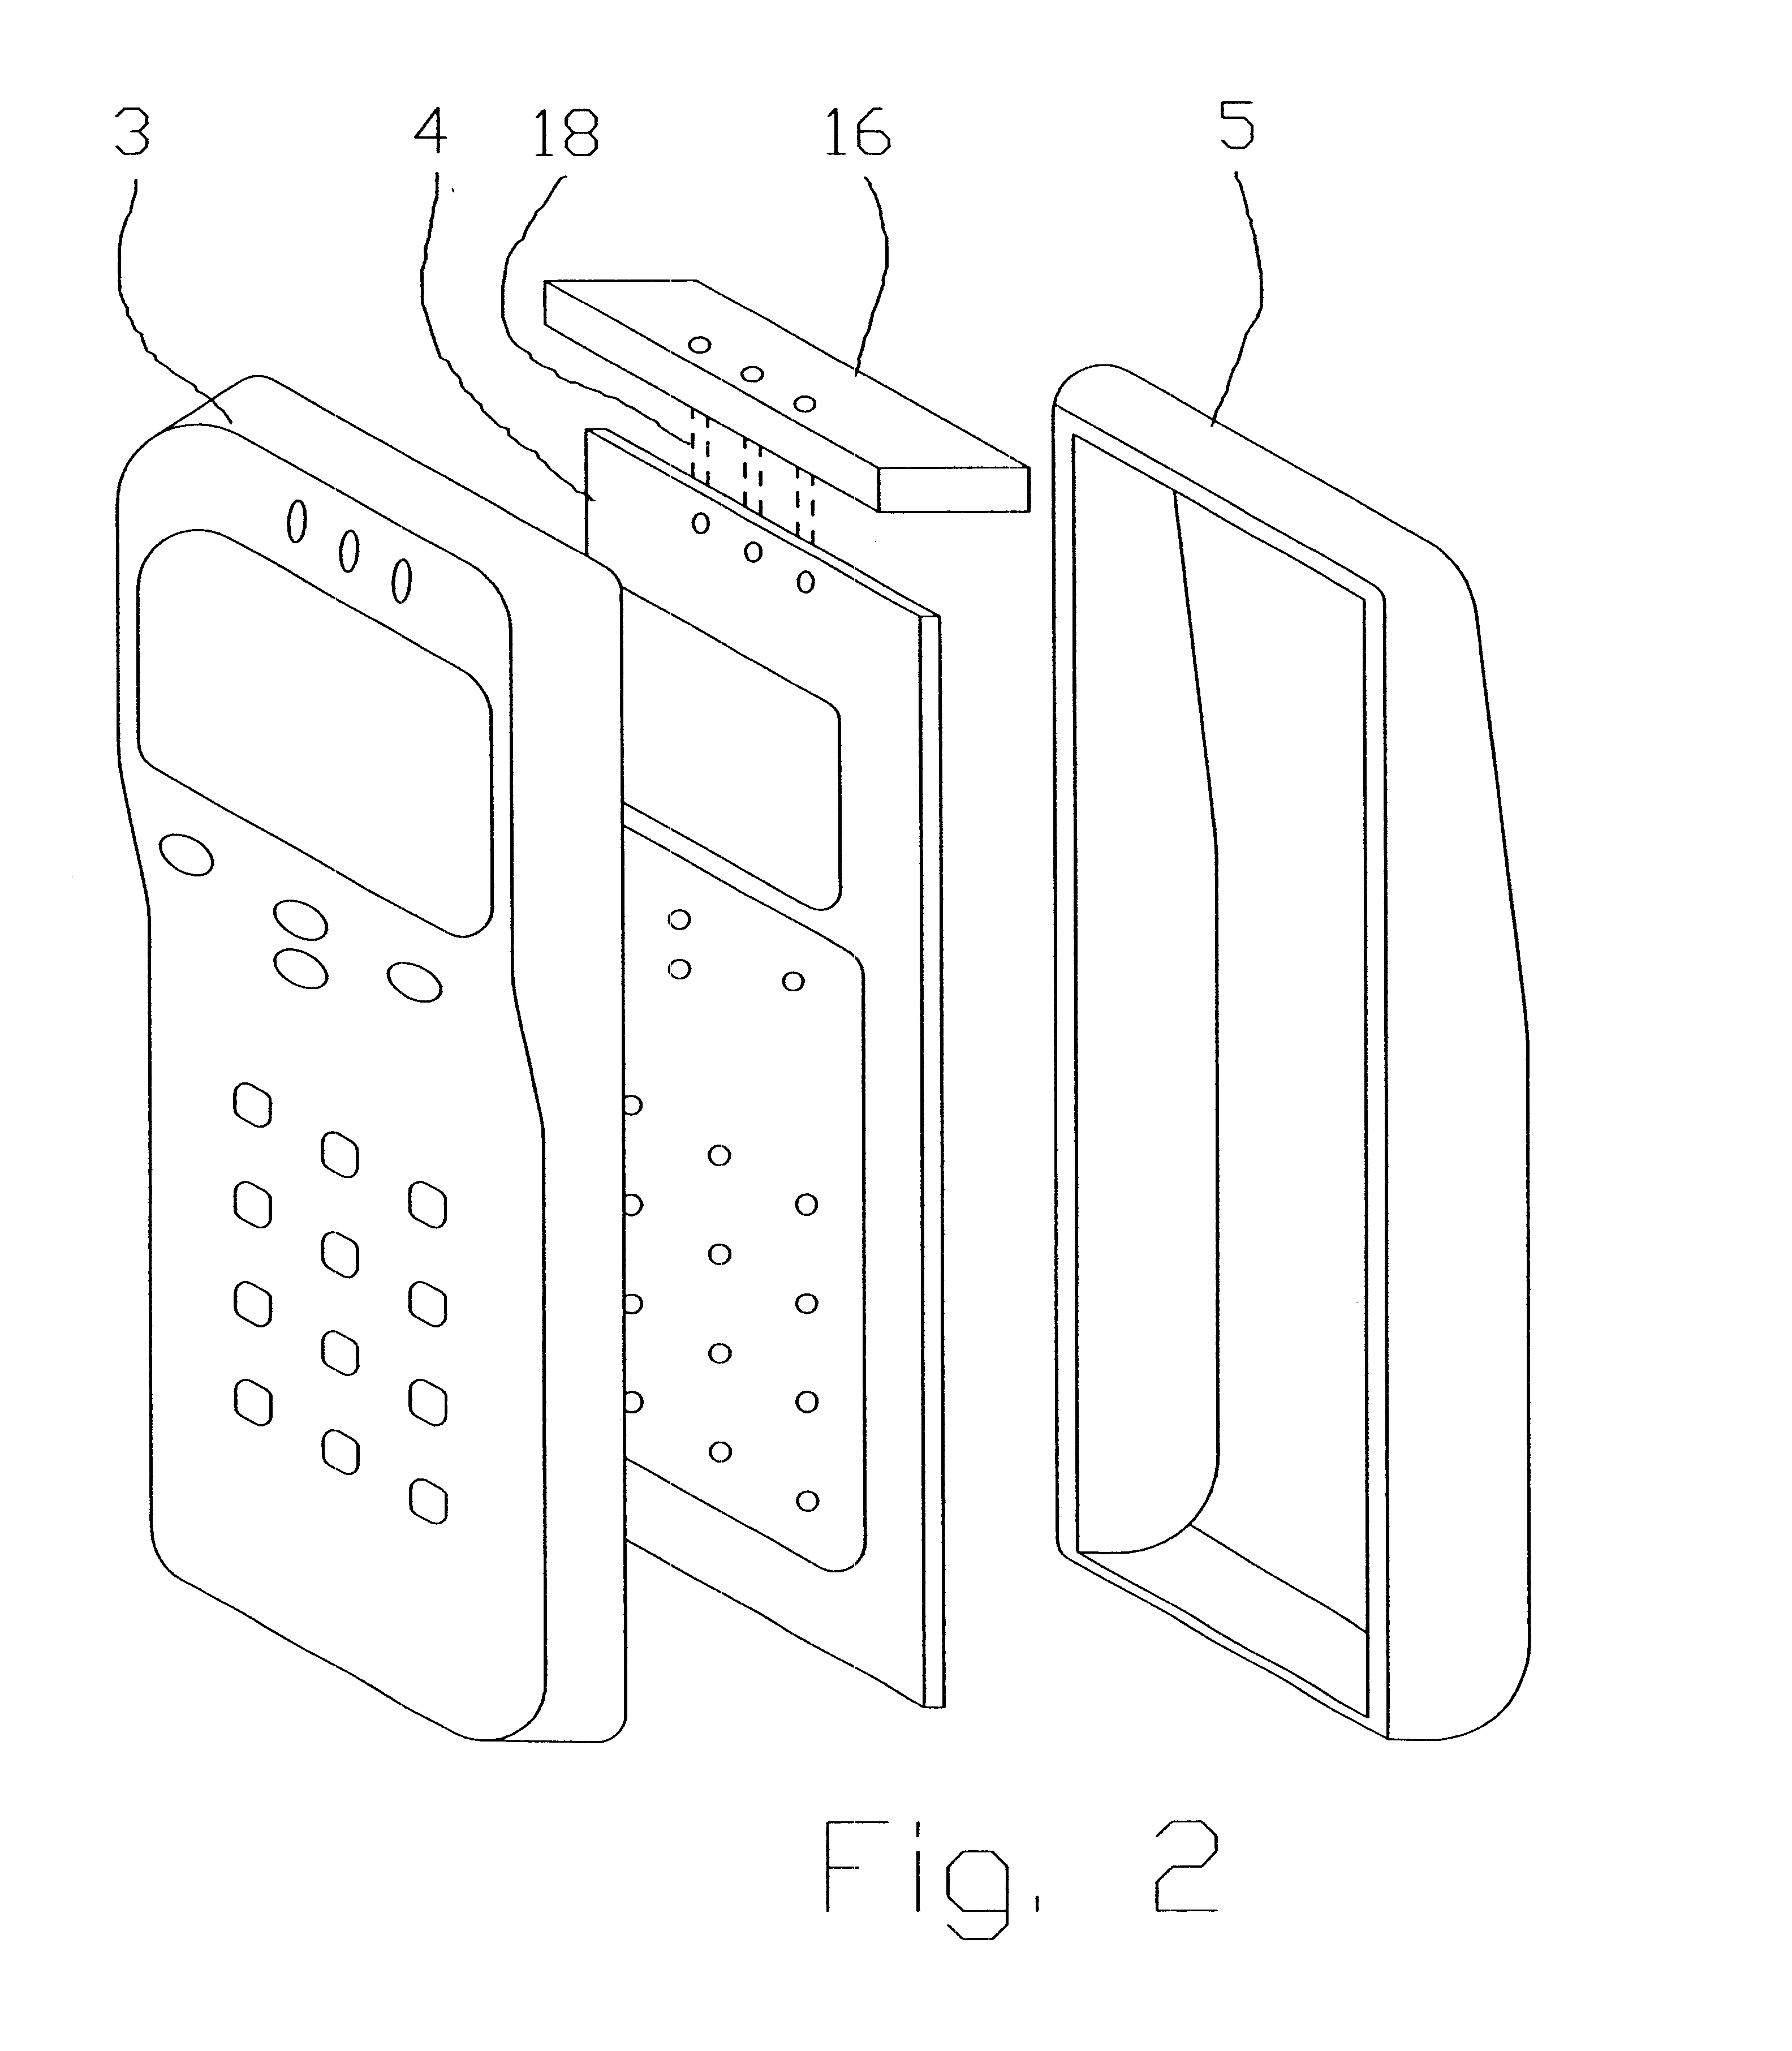 Internal antennas for mobile communication devices